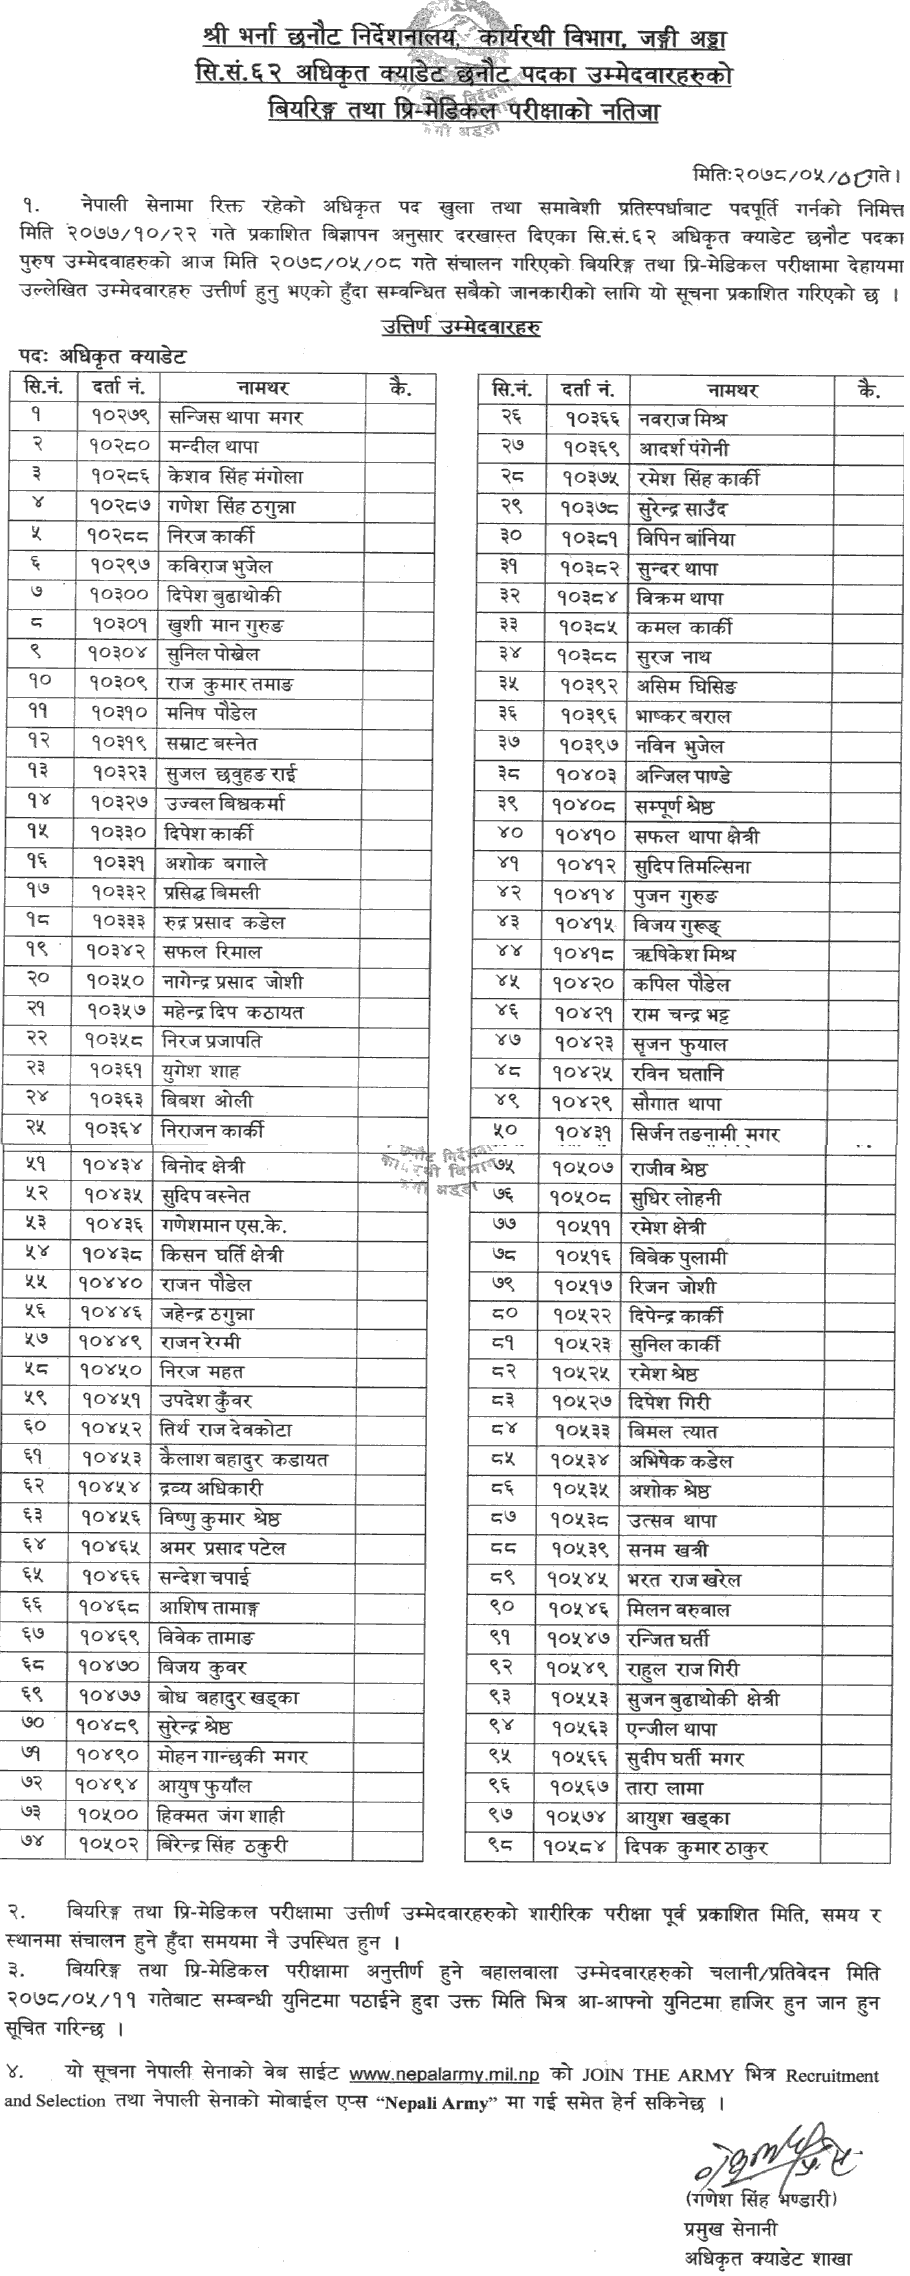 Nepal Army Officer Cadet SN 62 Bearing and Pre-Medical Examination Results